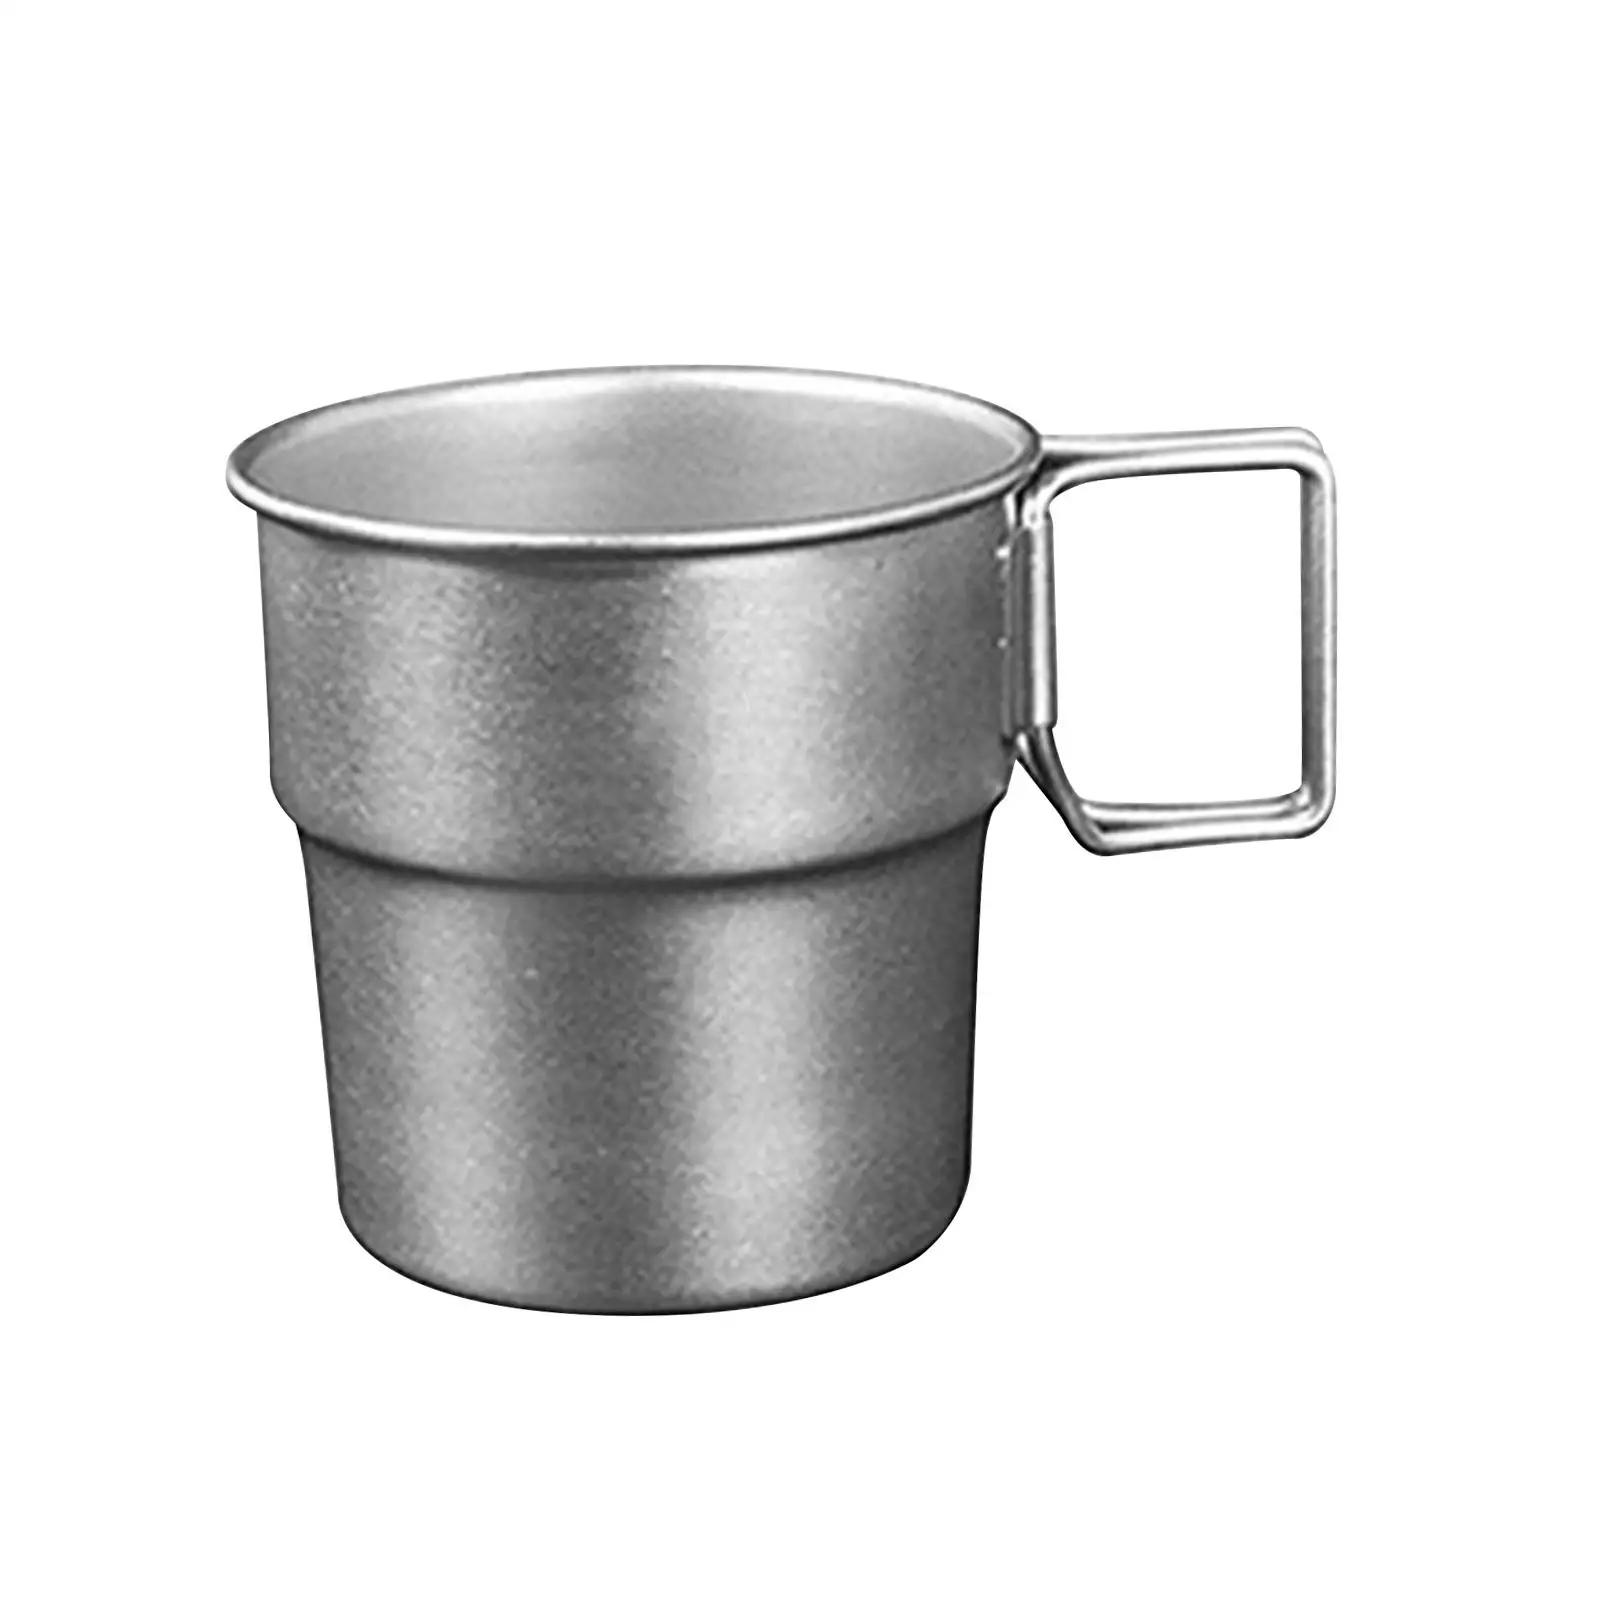 Stainless Steel Cups Pint Cups 300ml Capacity Stackable Reusable for Hot and Cold Drinks Sports Camping Traveling Teachers